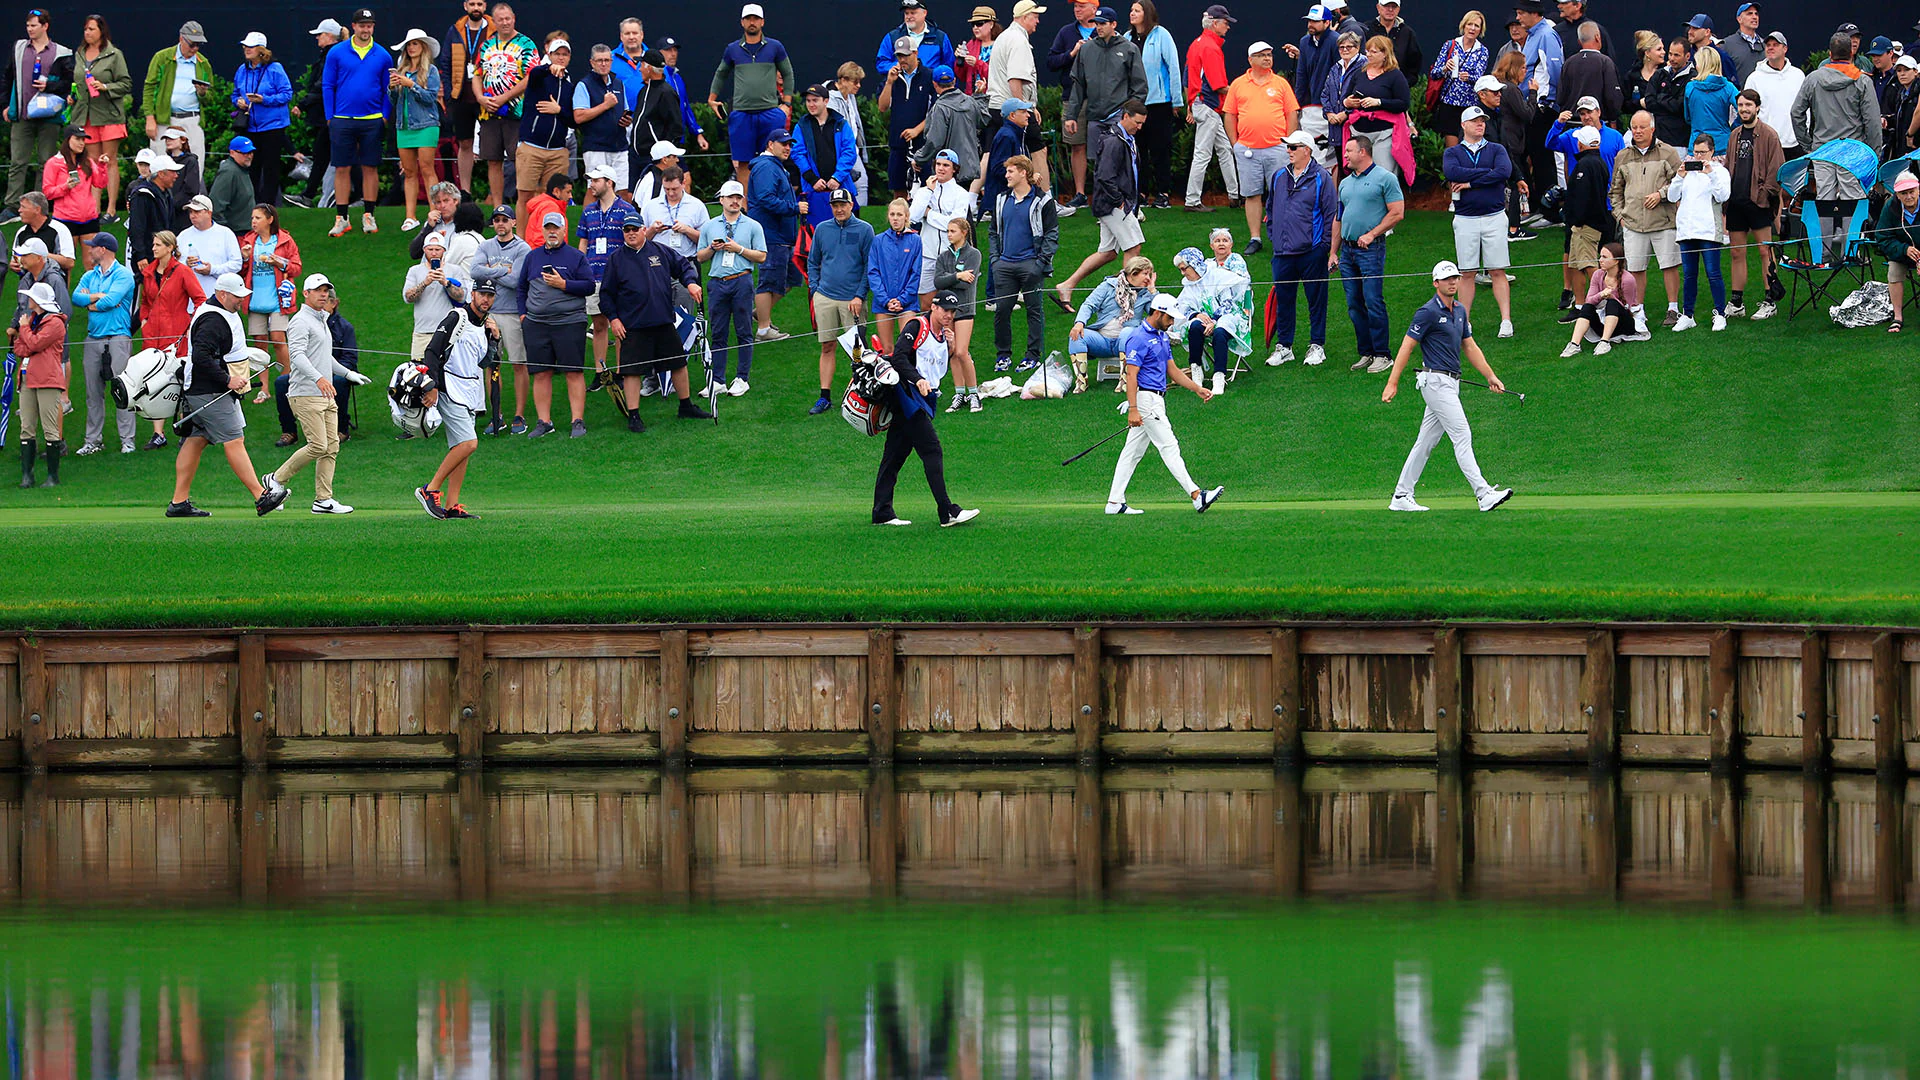 If you thought TPC Sawgrass' 17th was chilling already, wait until Saturday 2